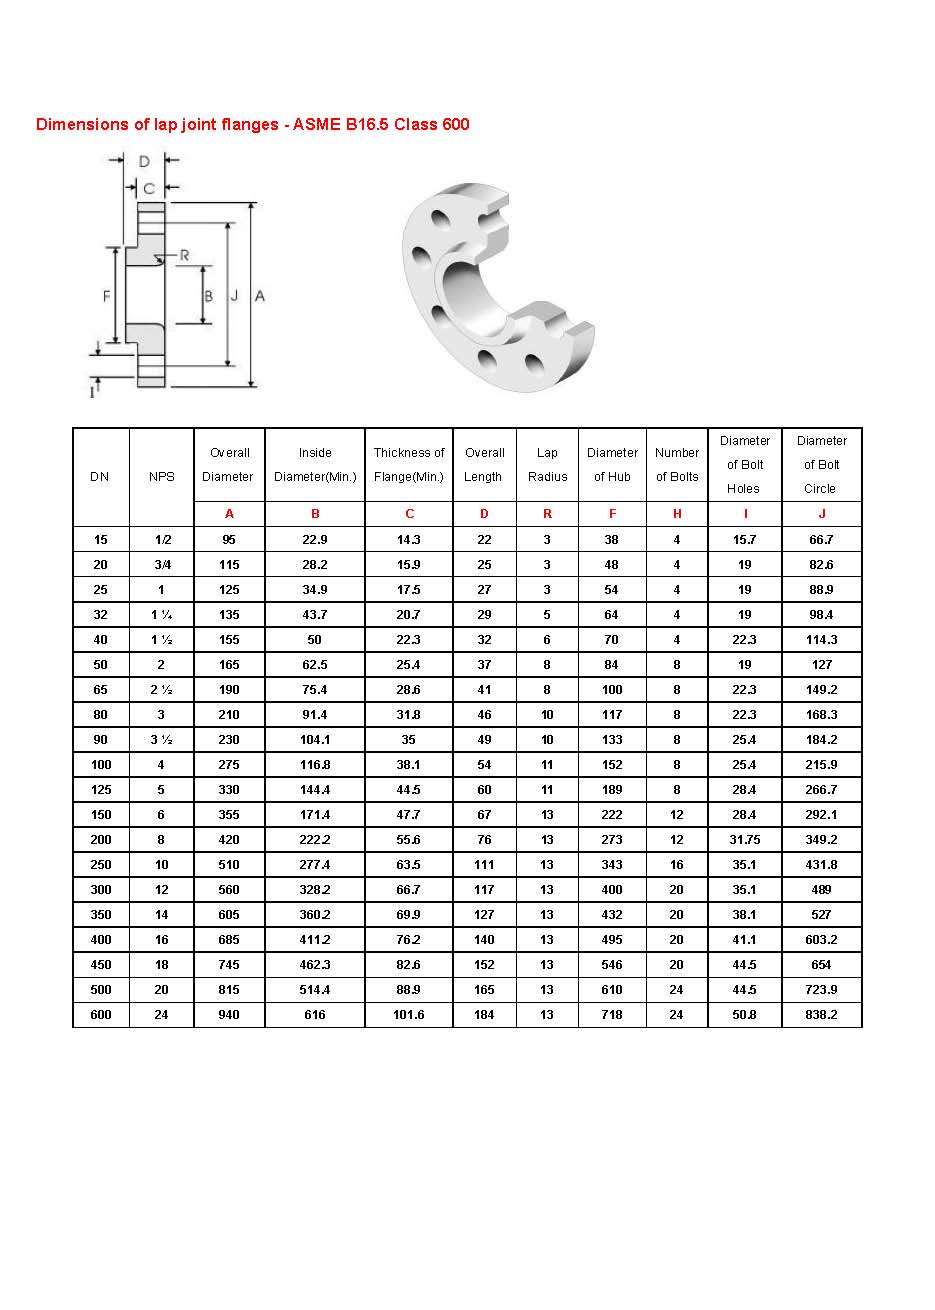 Dimensions of lap joint flanges - ASME B16.5_class600